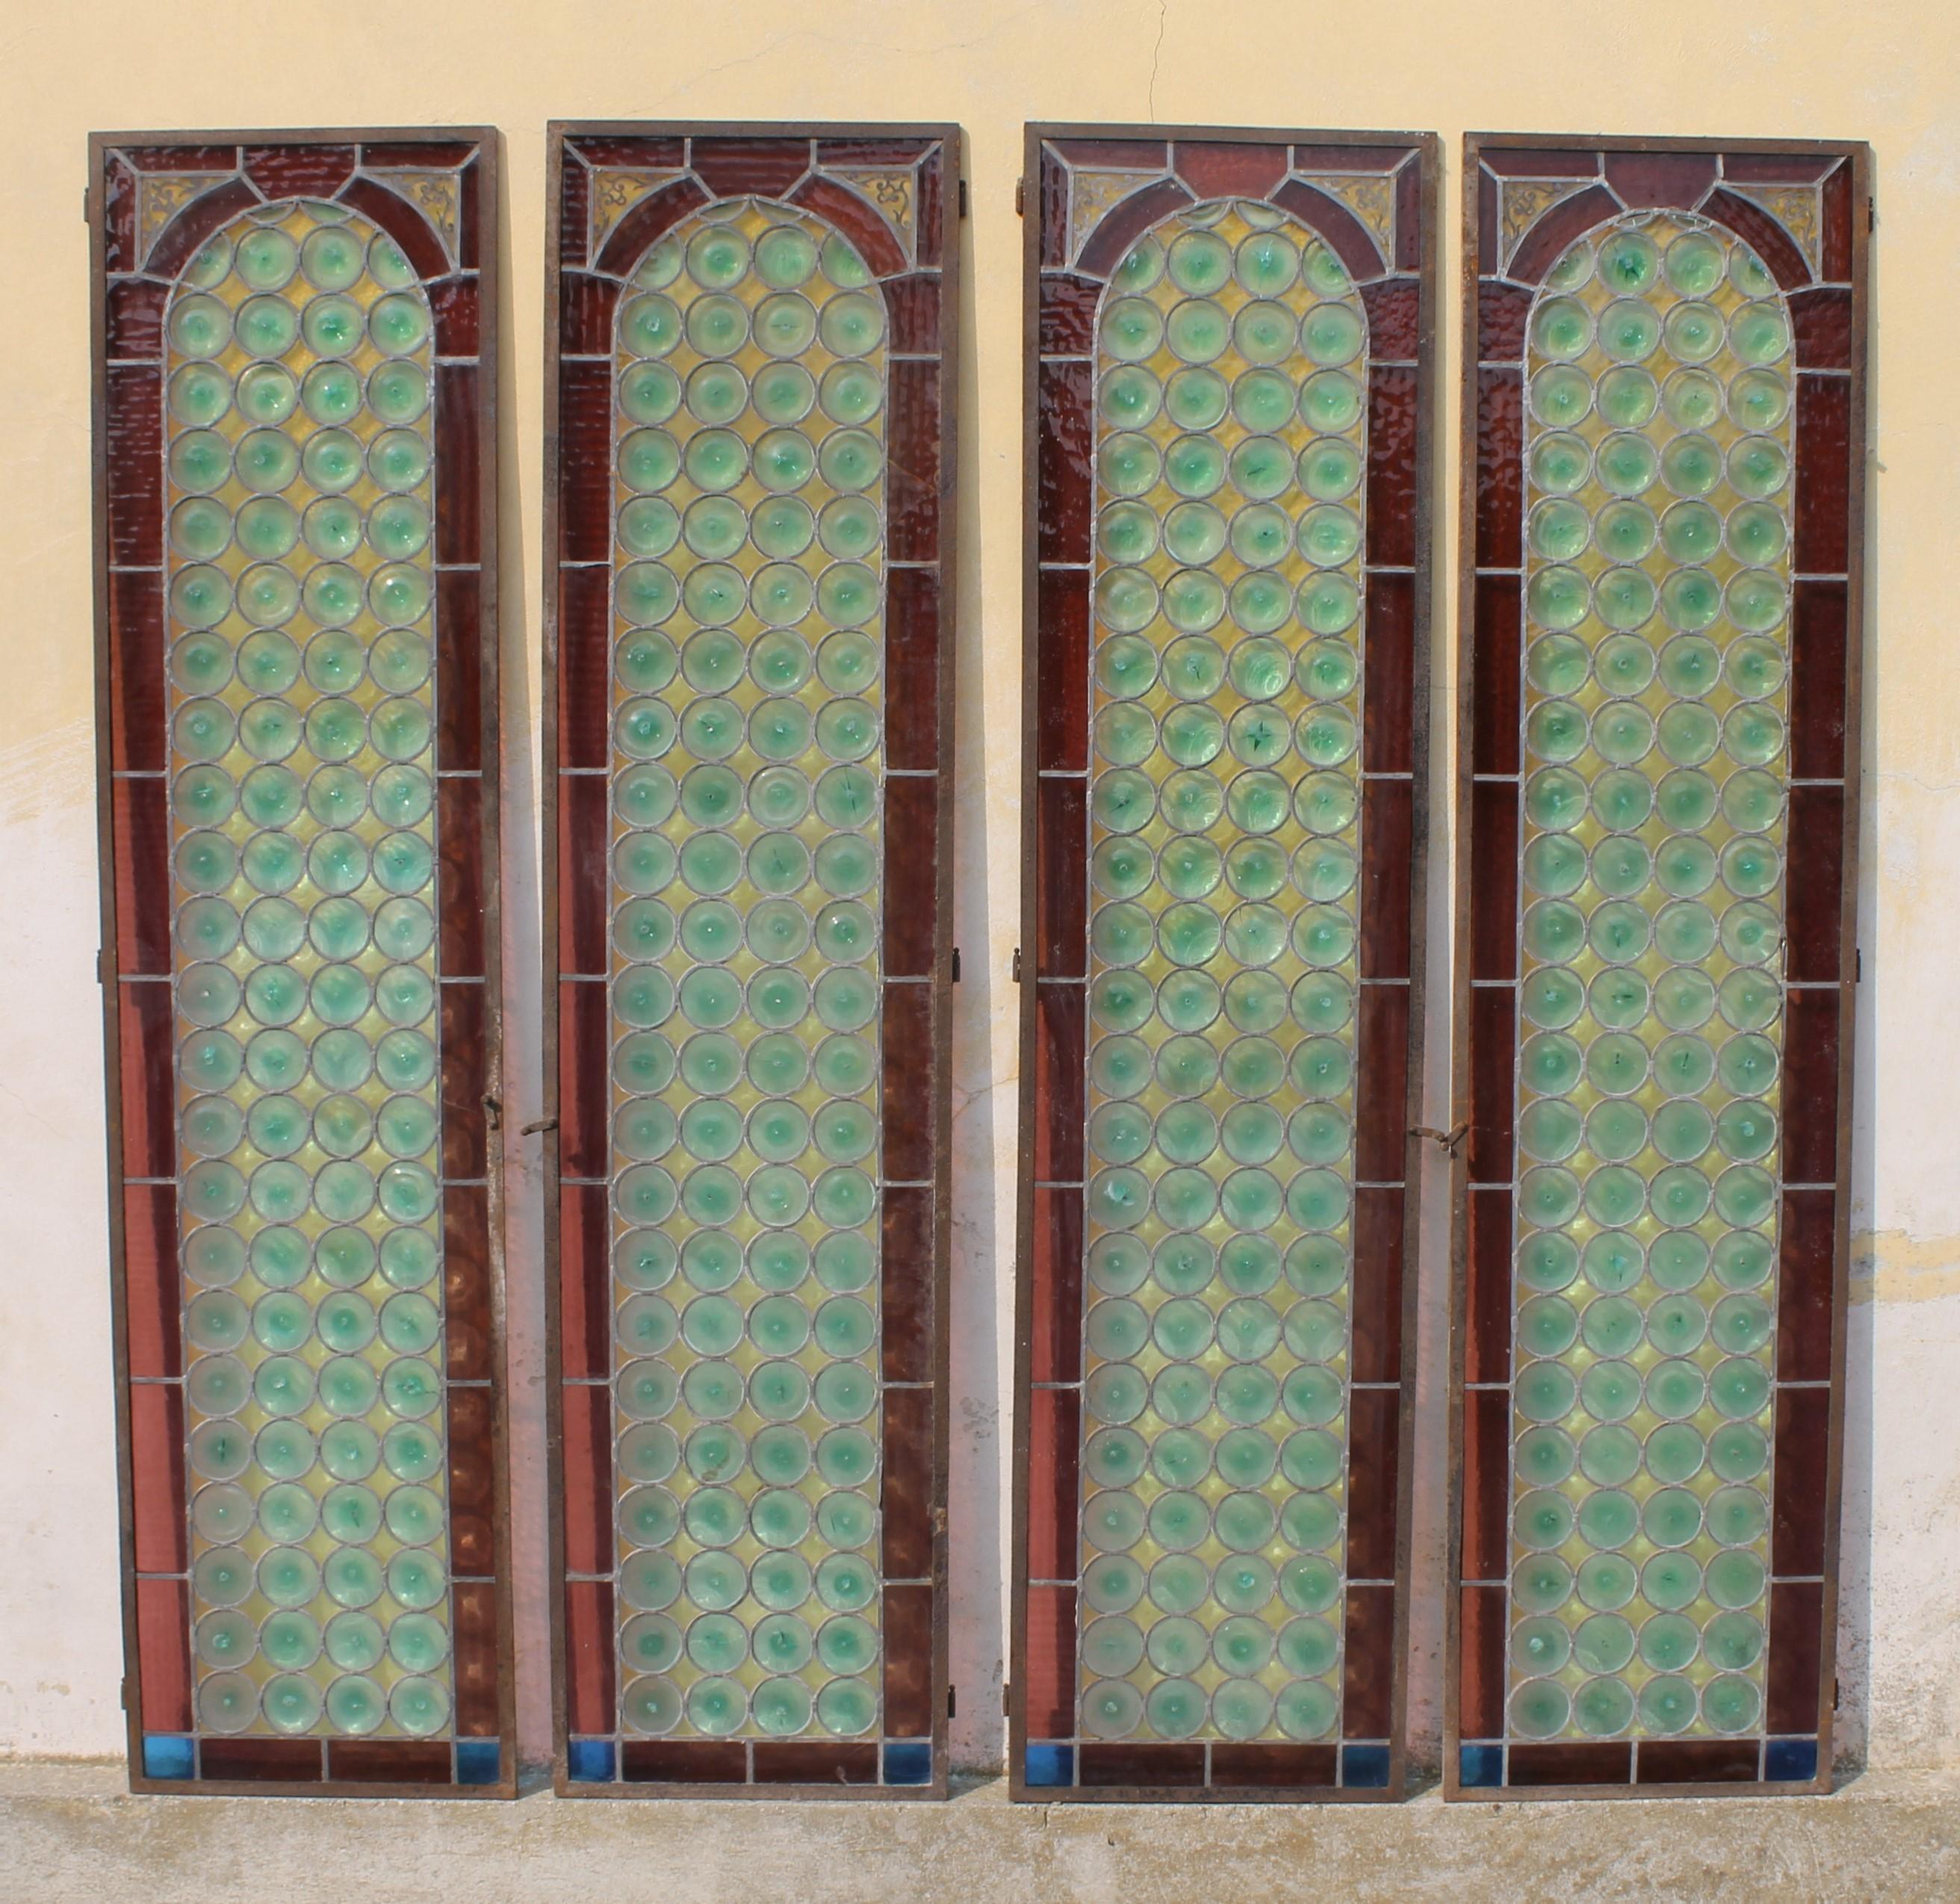 Set of four Italian Stained Glass door- window Panels, Italy 1890 circa

Measure: Each door/panel measures height cm. 210,5, width cm. 51 and just under cm. 2 thick.